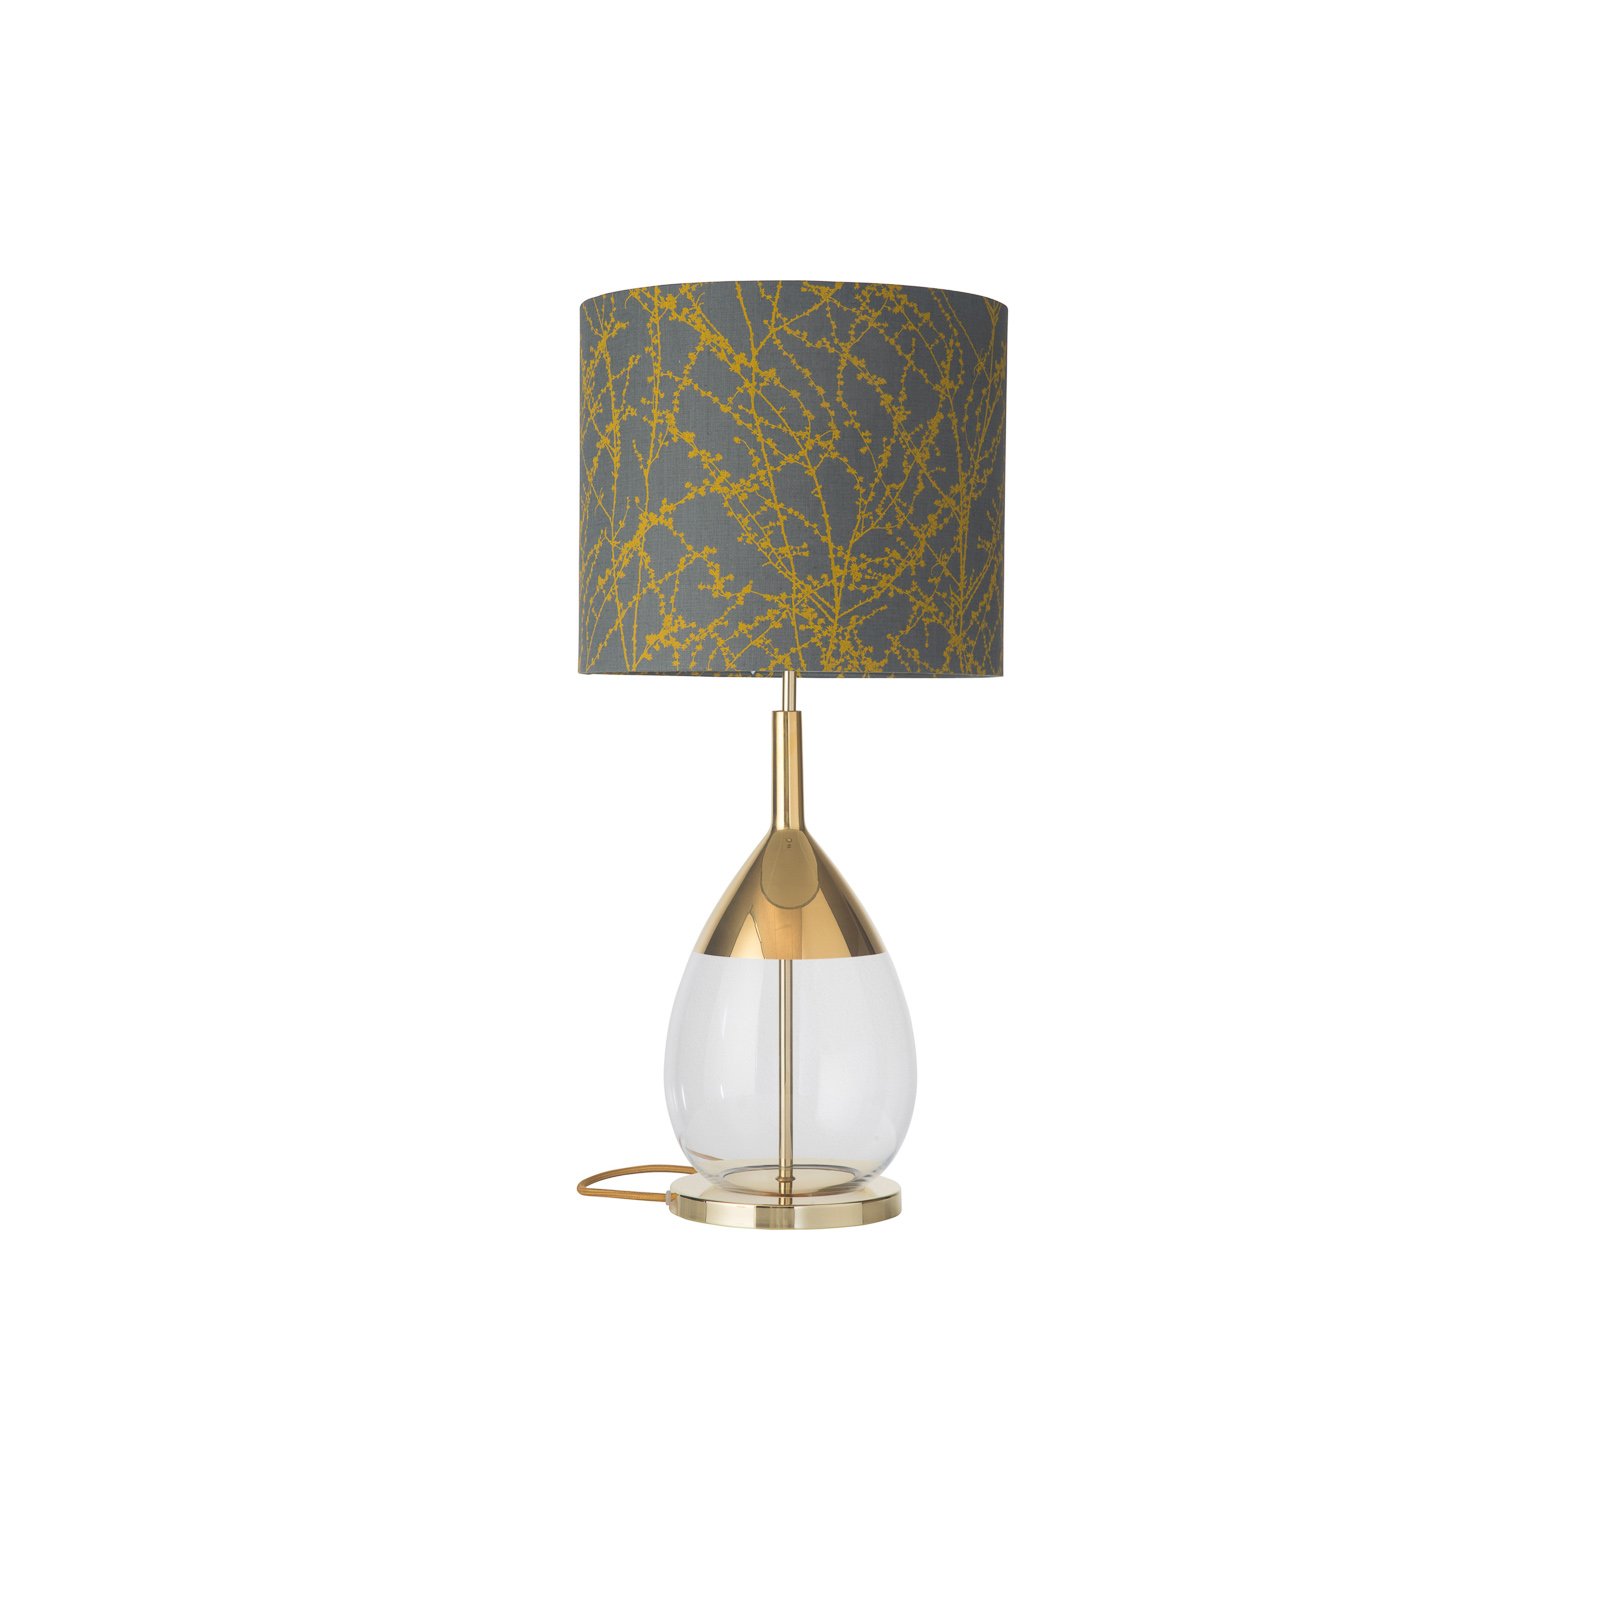 EBB & FLOW Lute table lamp Branches grey/ochre